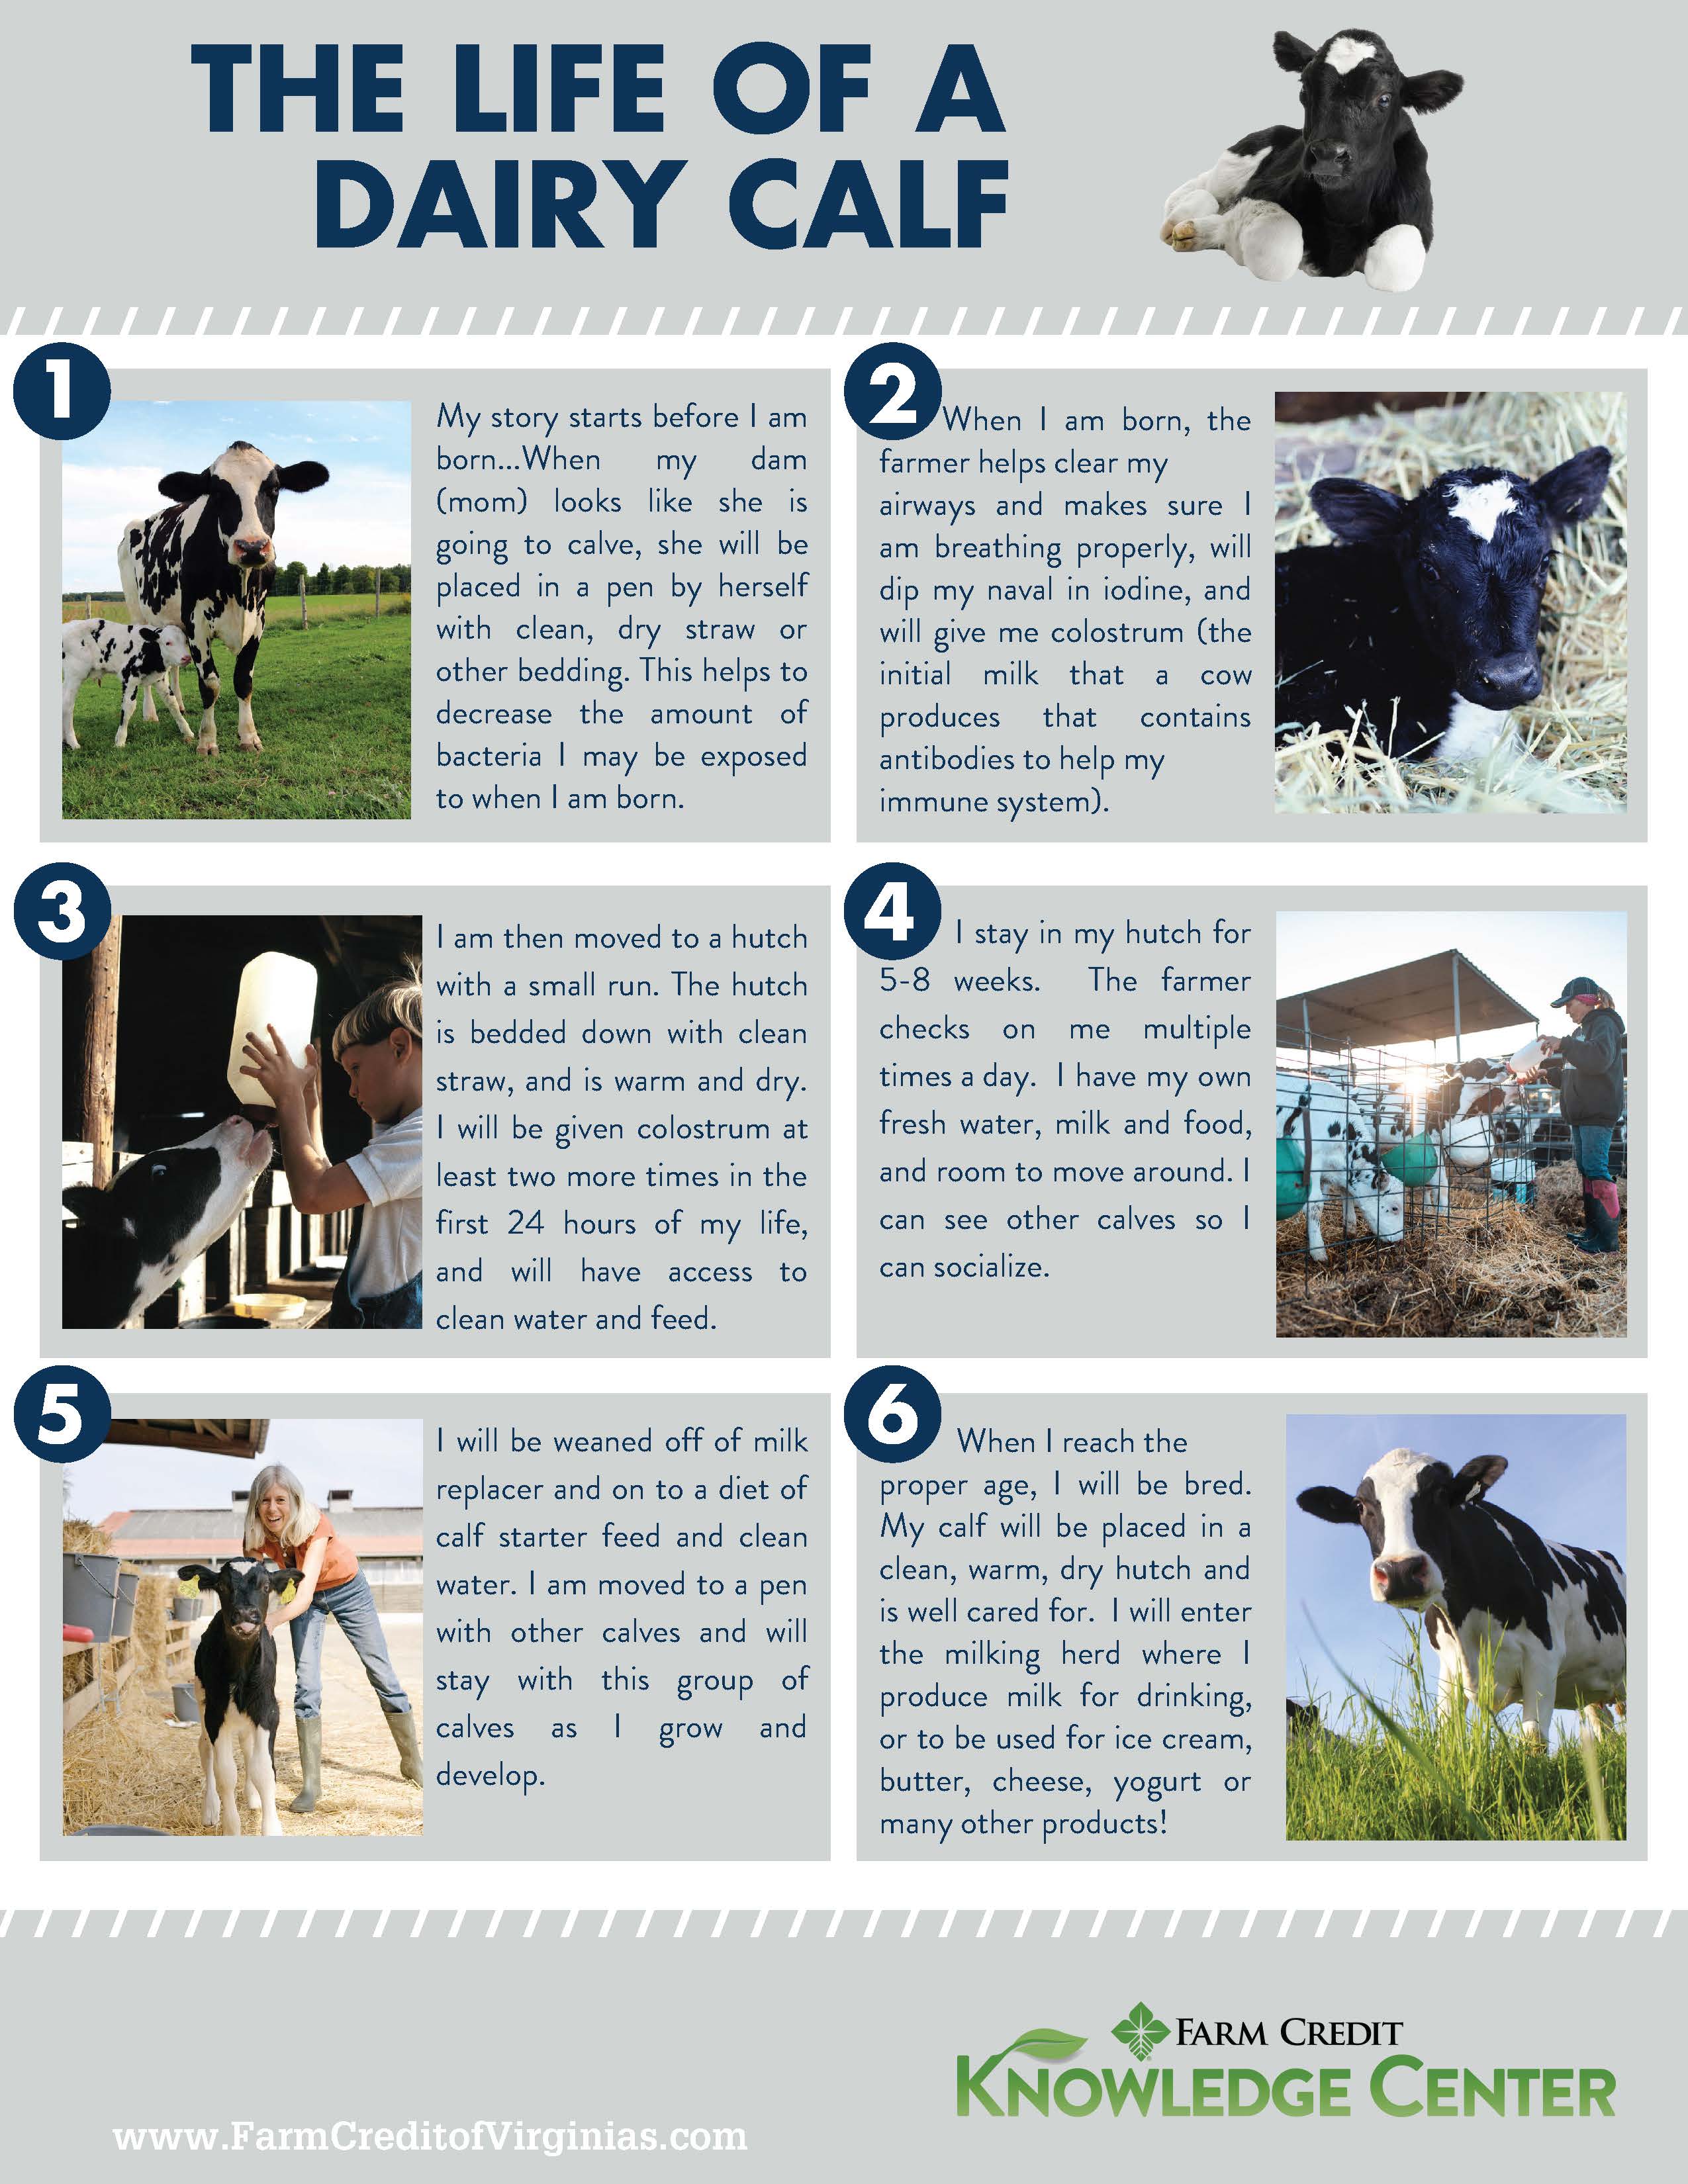 Life of a dairy calf infographic